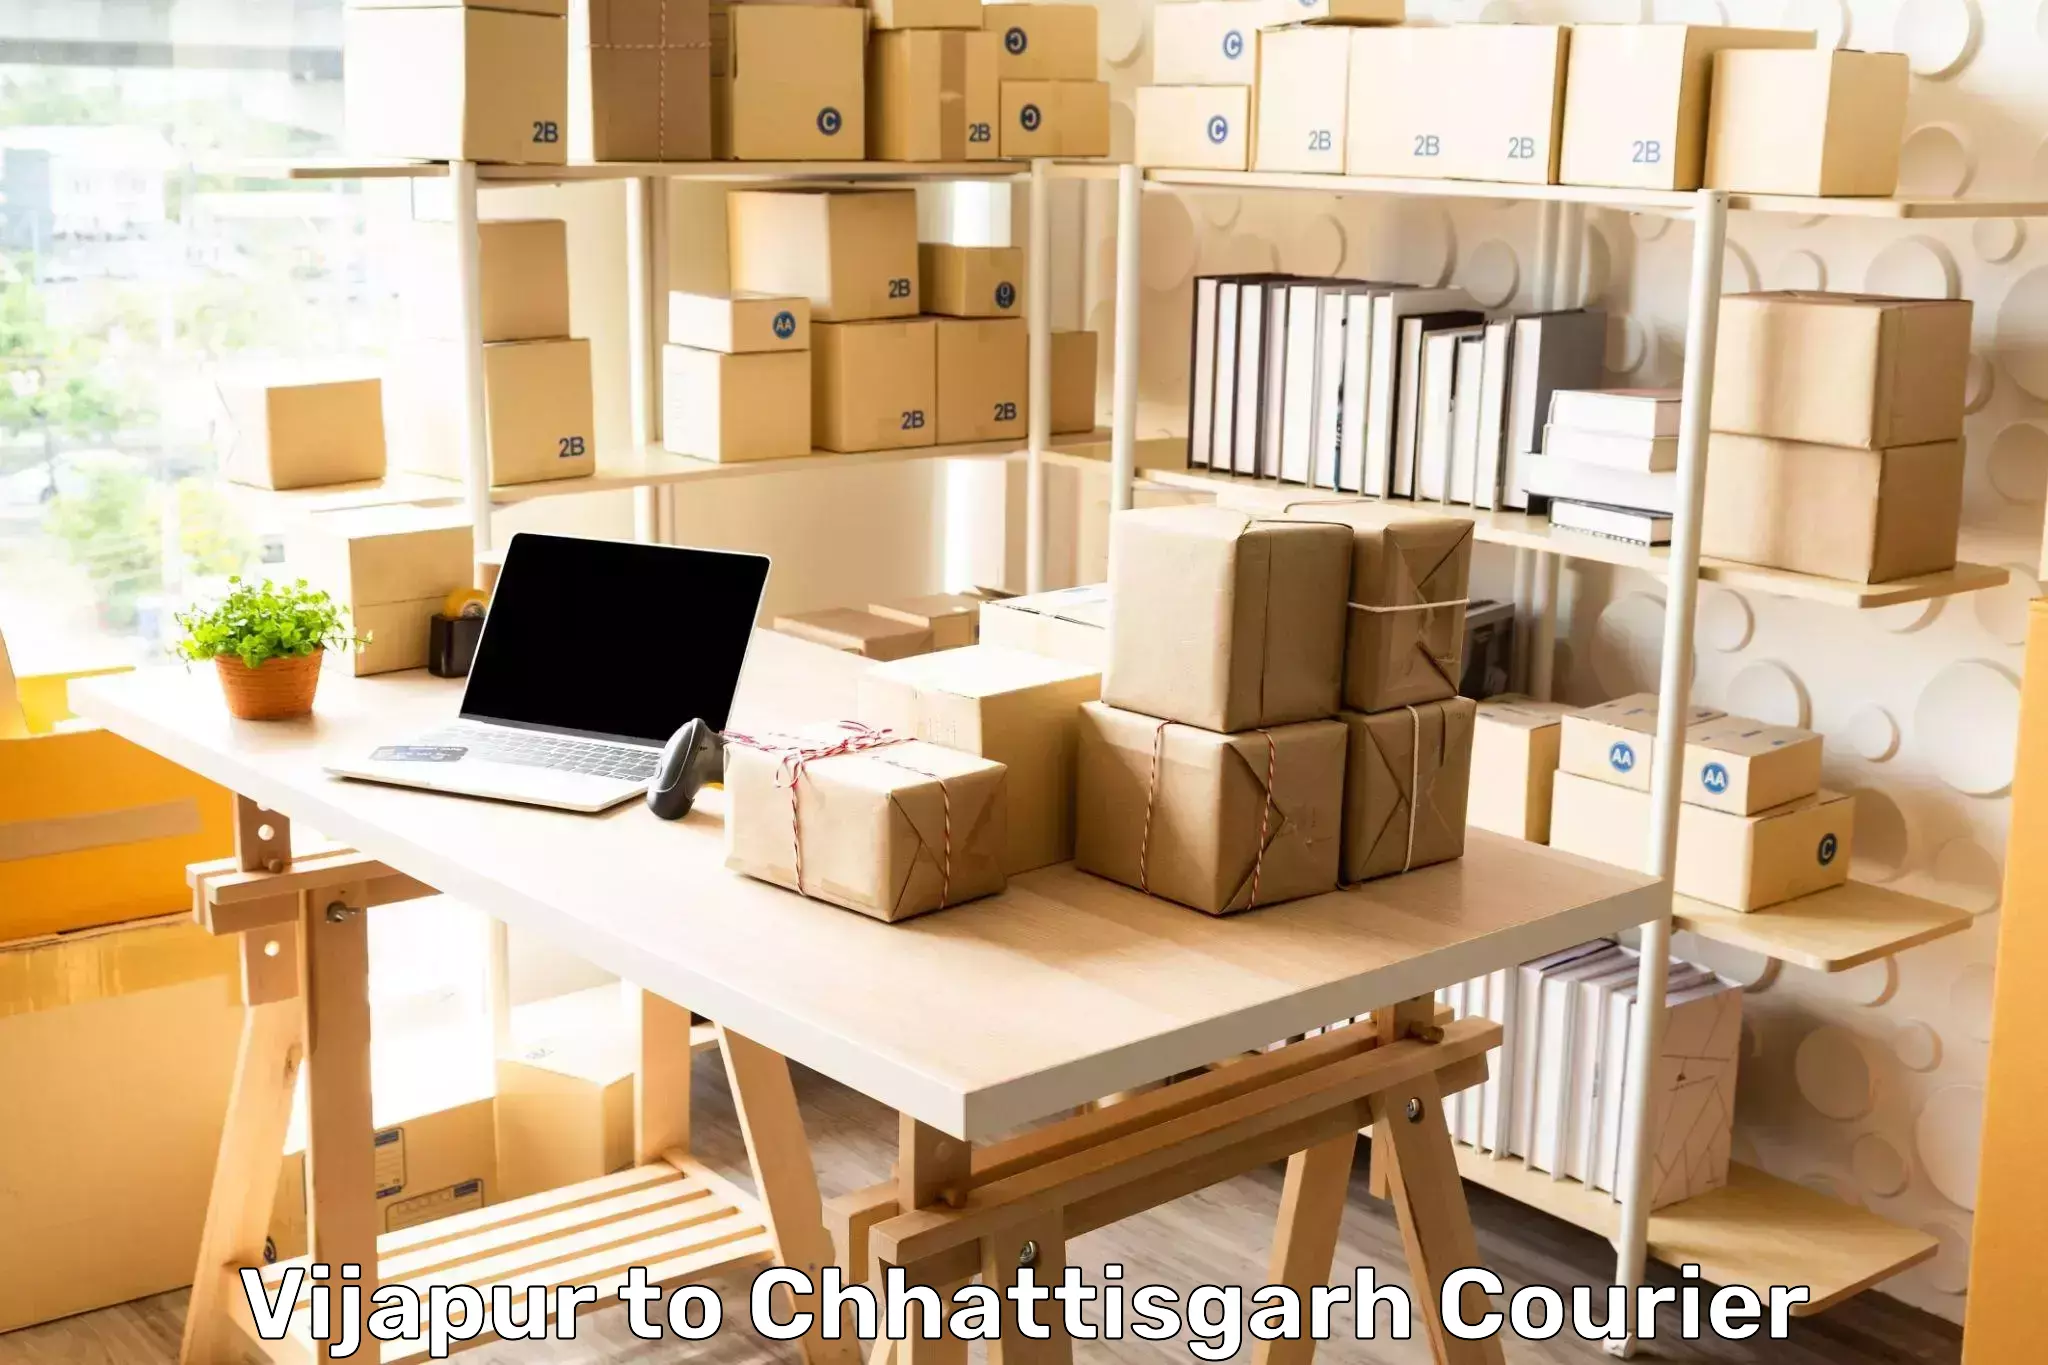 Expedited parcel delivery in Vijapur to Manendragarh